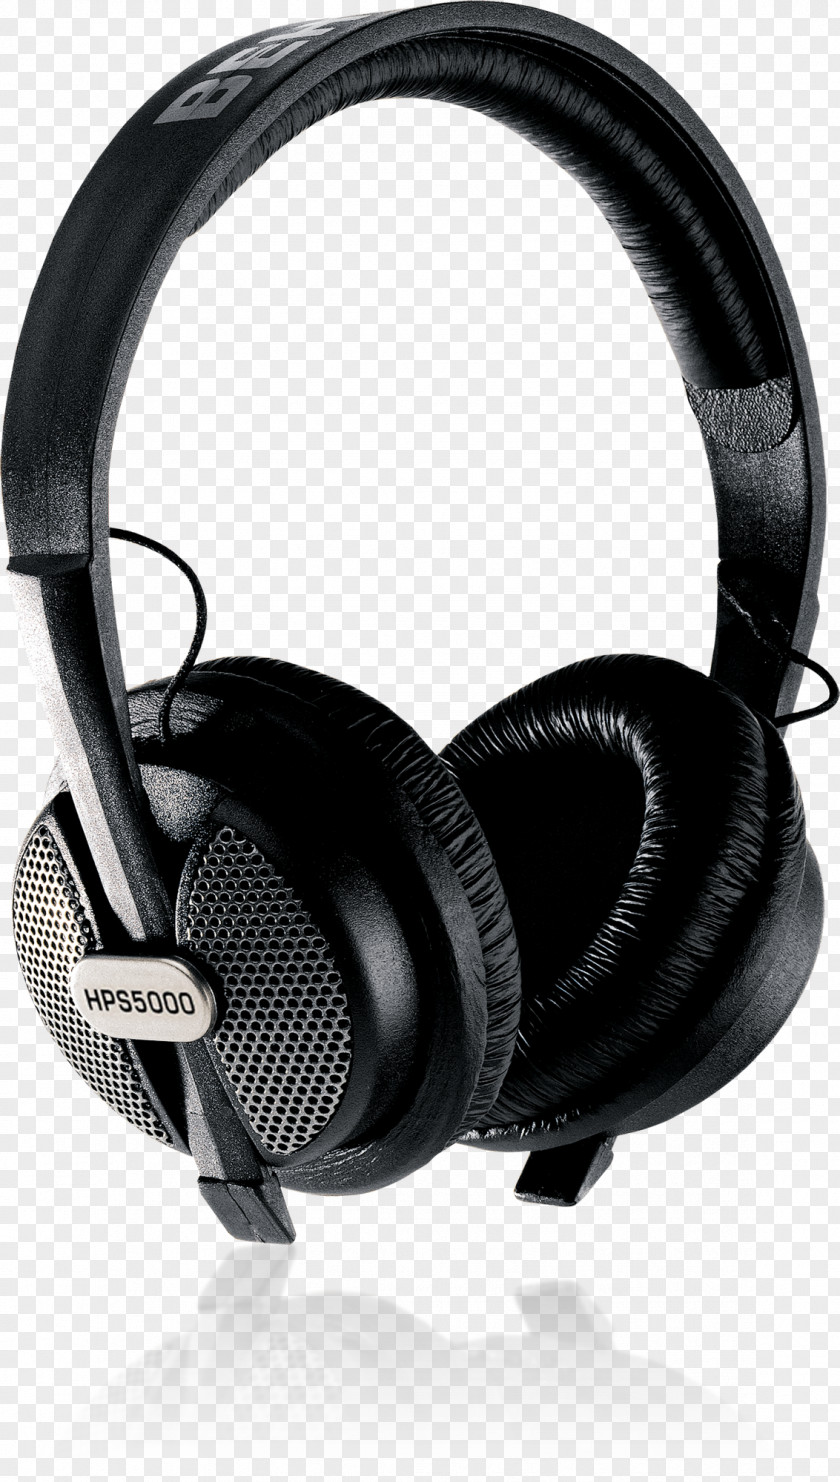 Headphones BEHRINGER HPS3000 Sound Recording And Reproduction Audio PNG